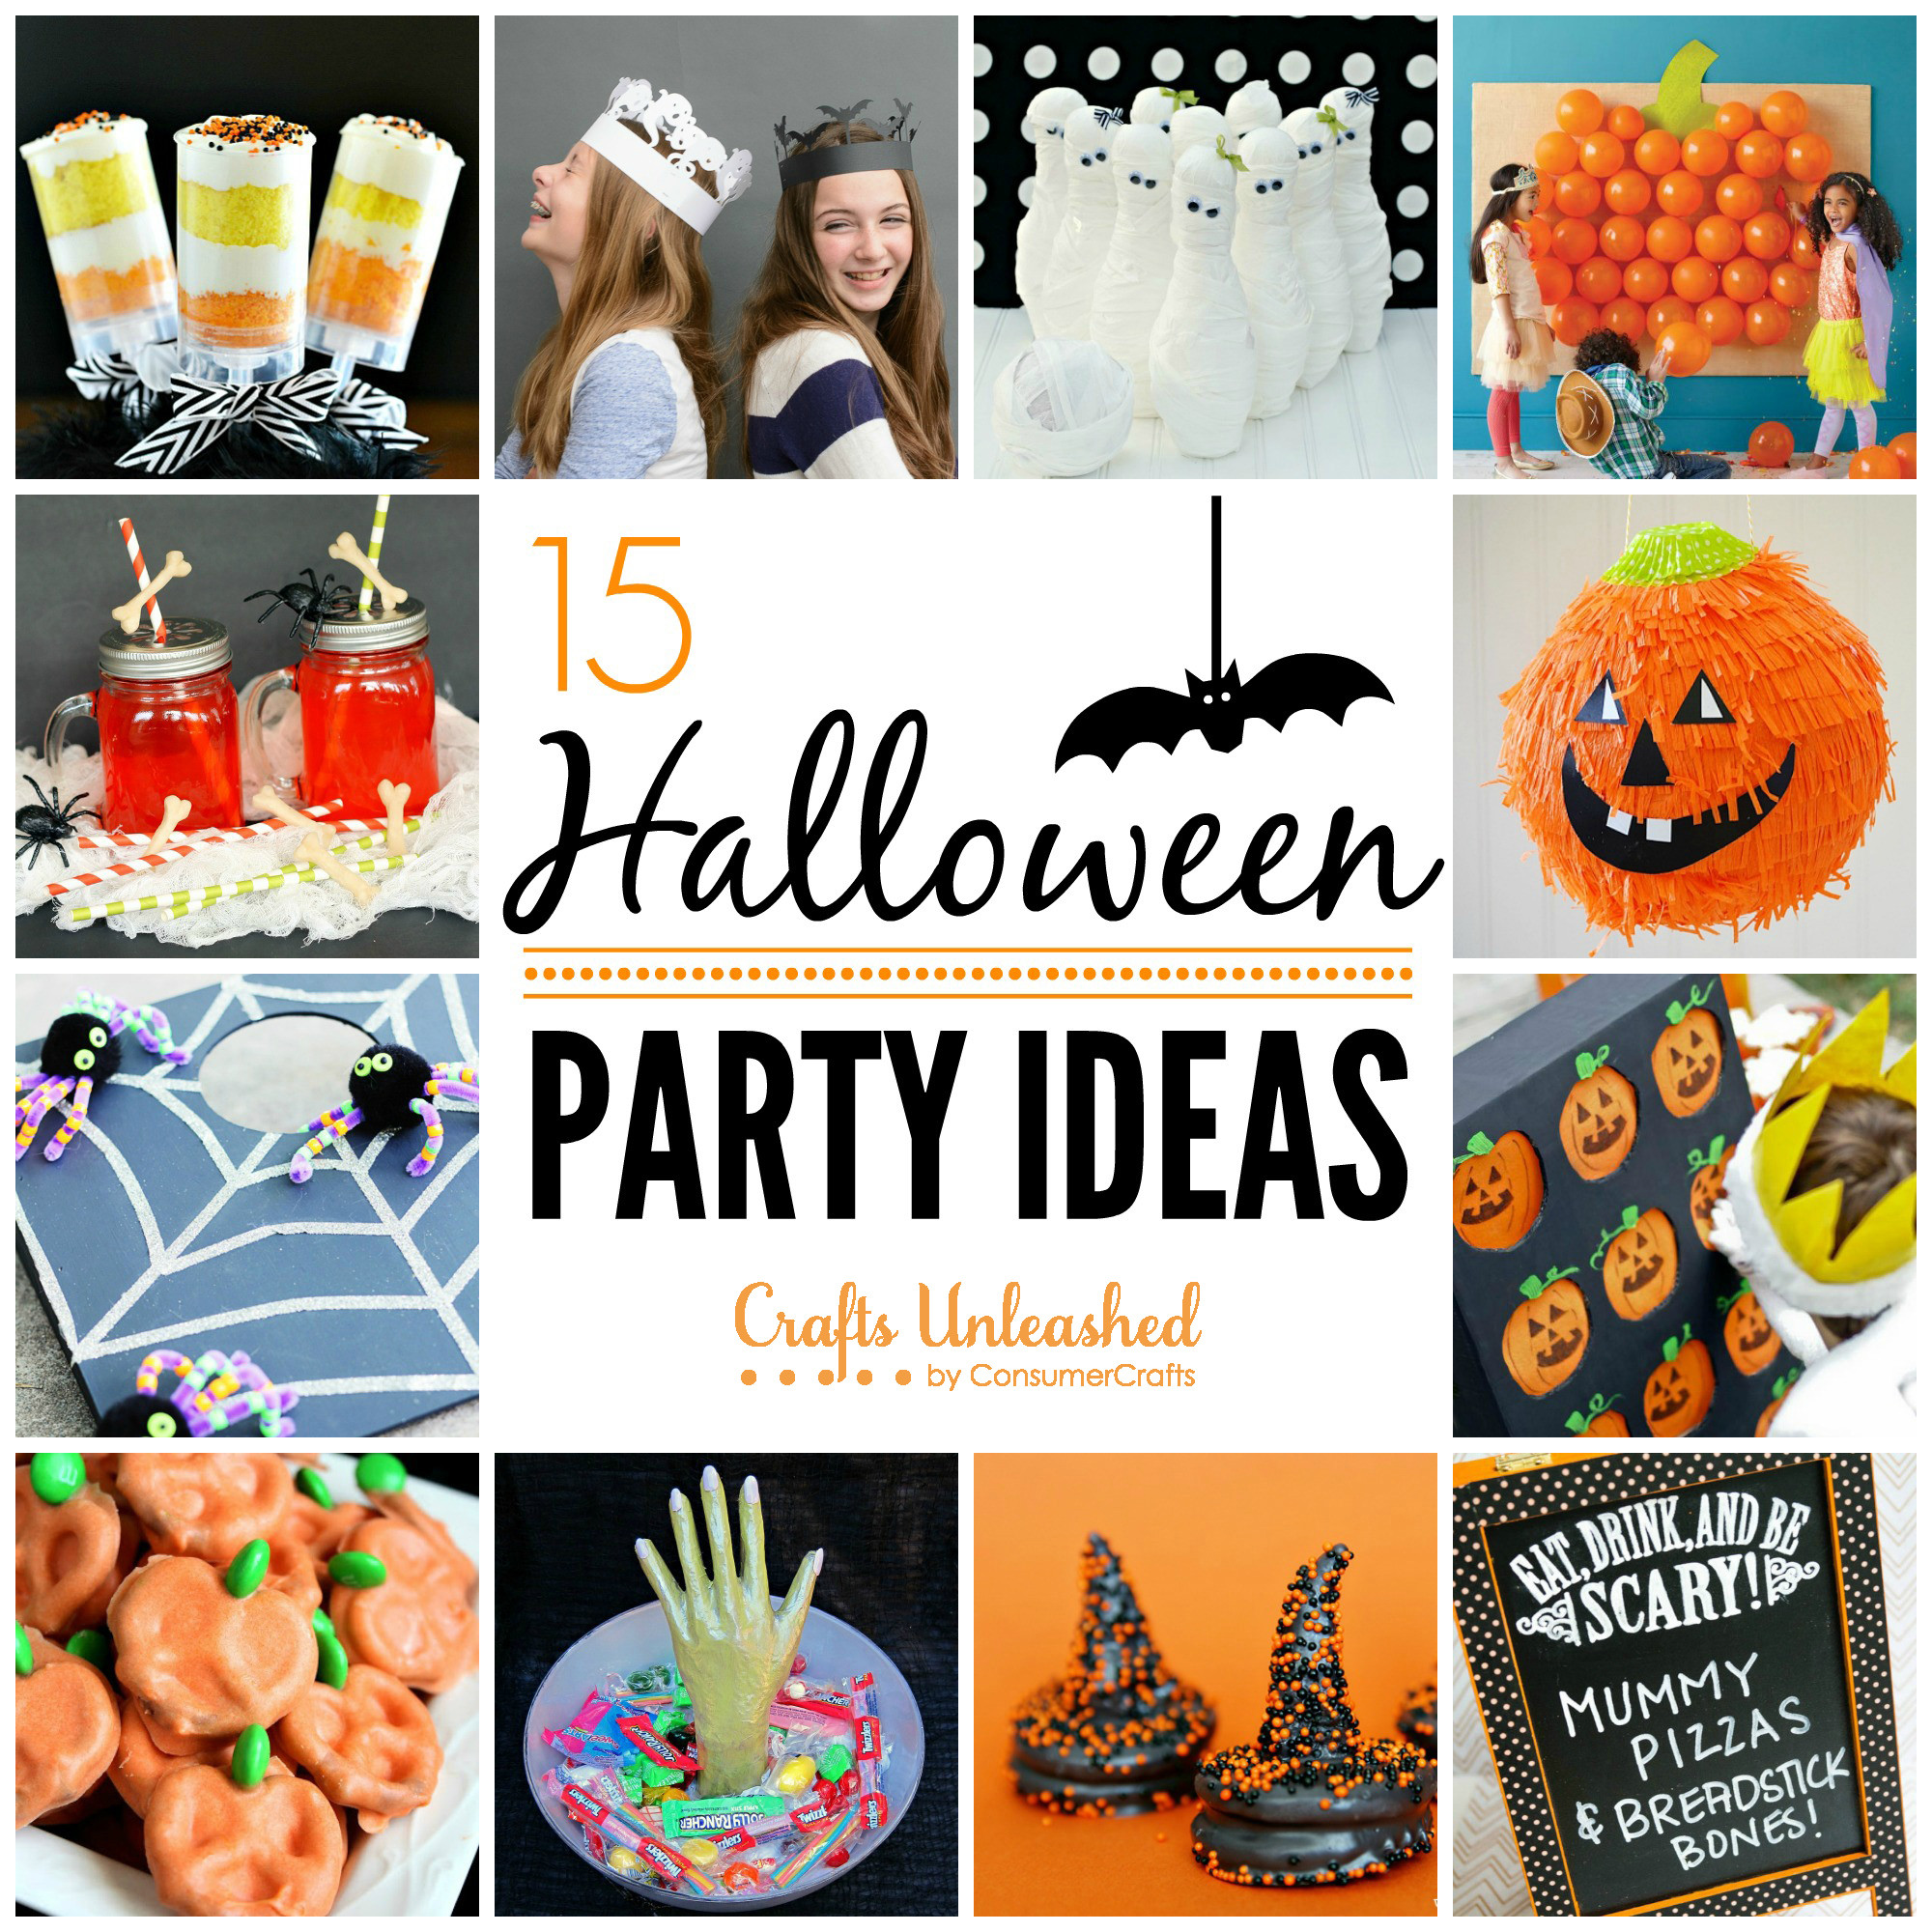 Halloween Party Activity Ideas
 Halloween Party Ideas Crafts Unleashed